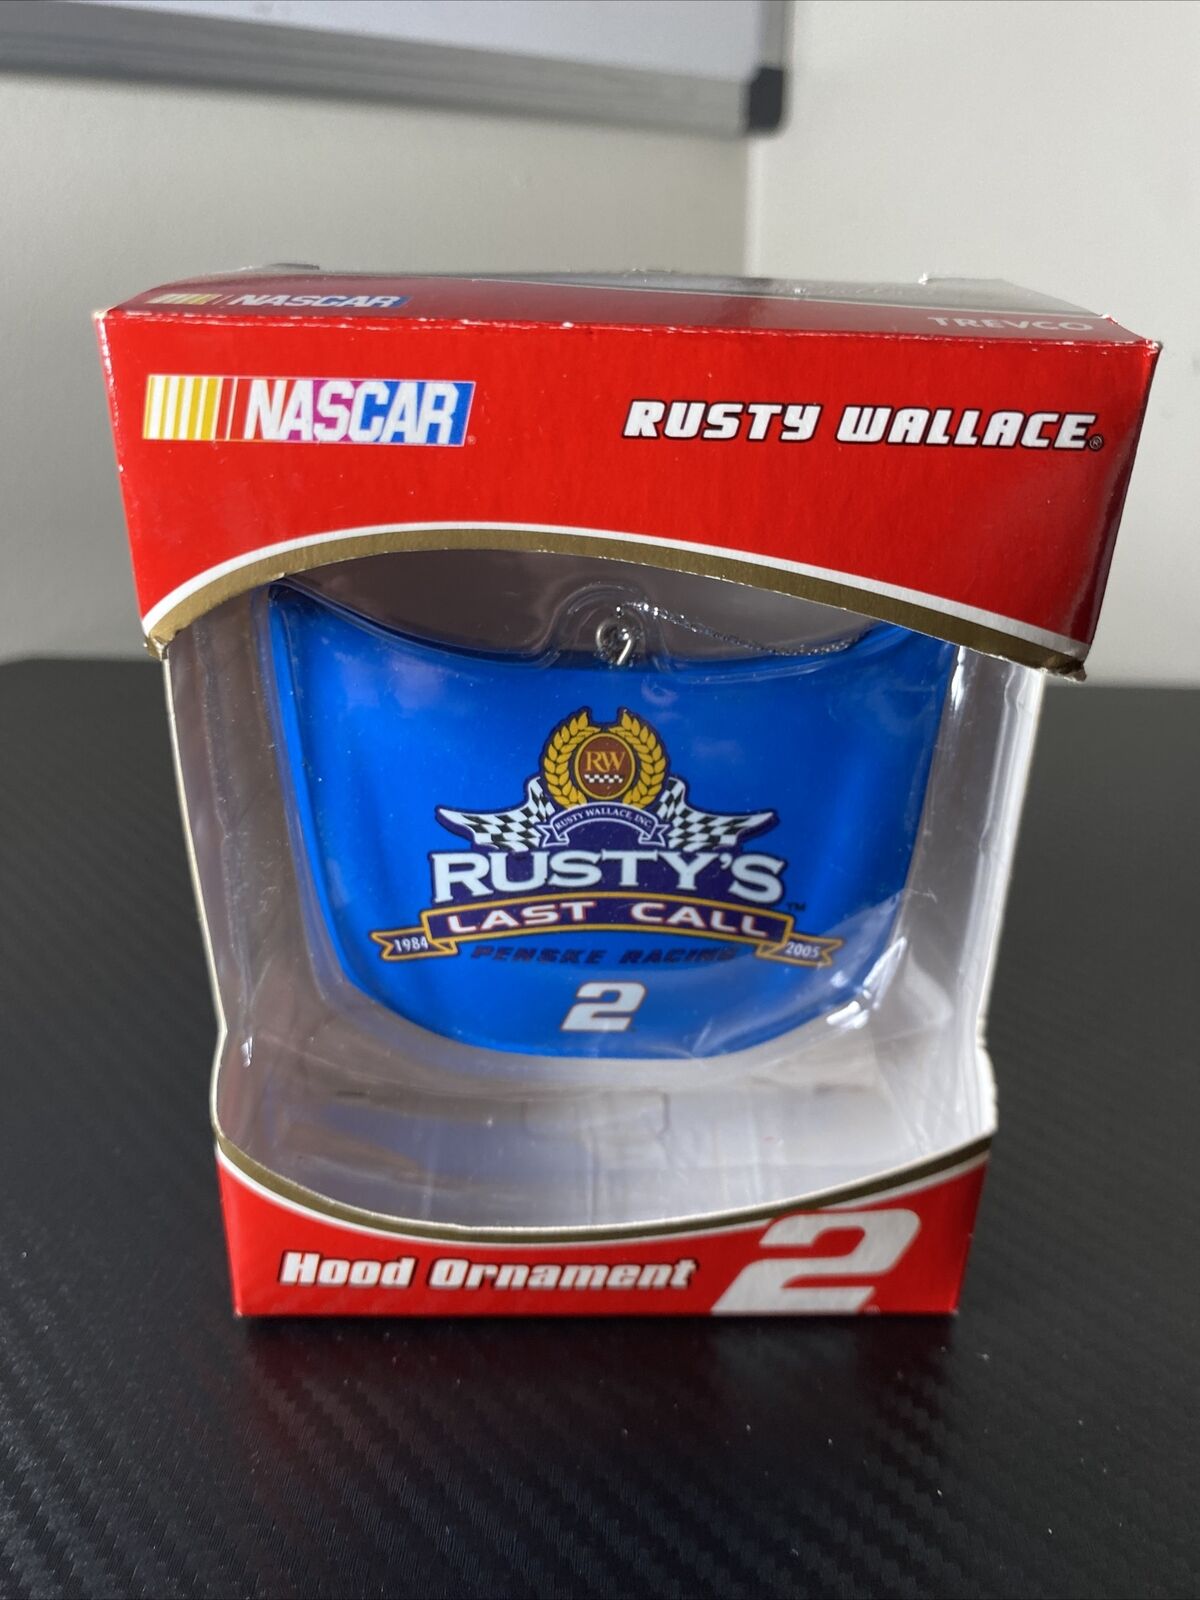 Nascar Hood Ornament Rusty Wallace Trevco Rusty\'s Last Call 2005 Dodge Charger 